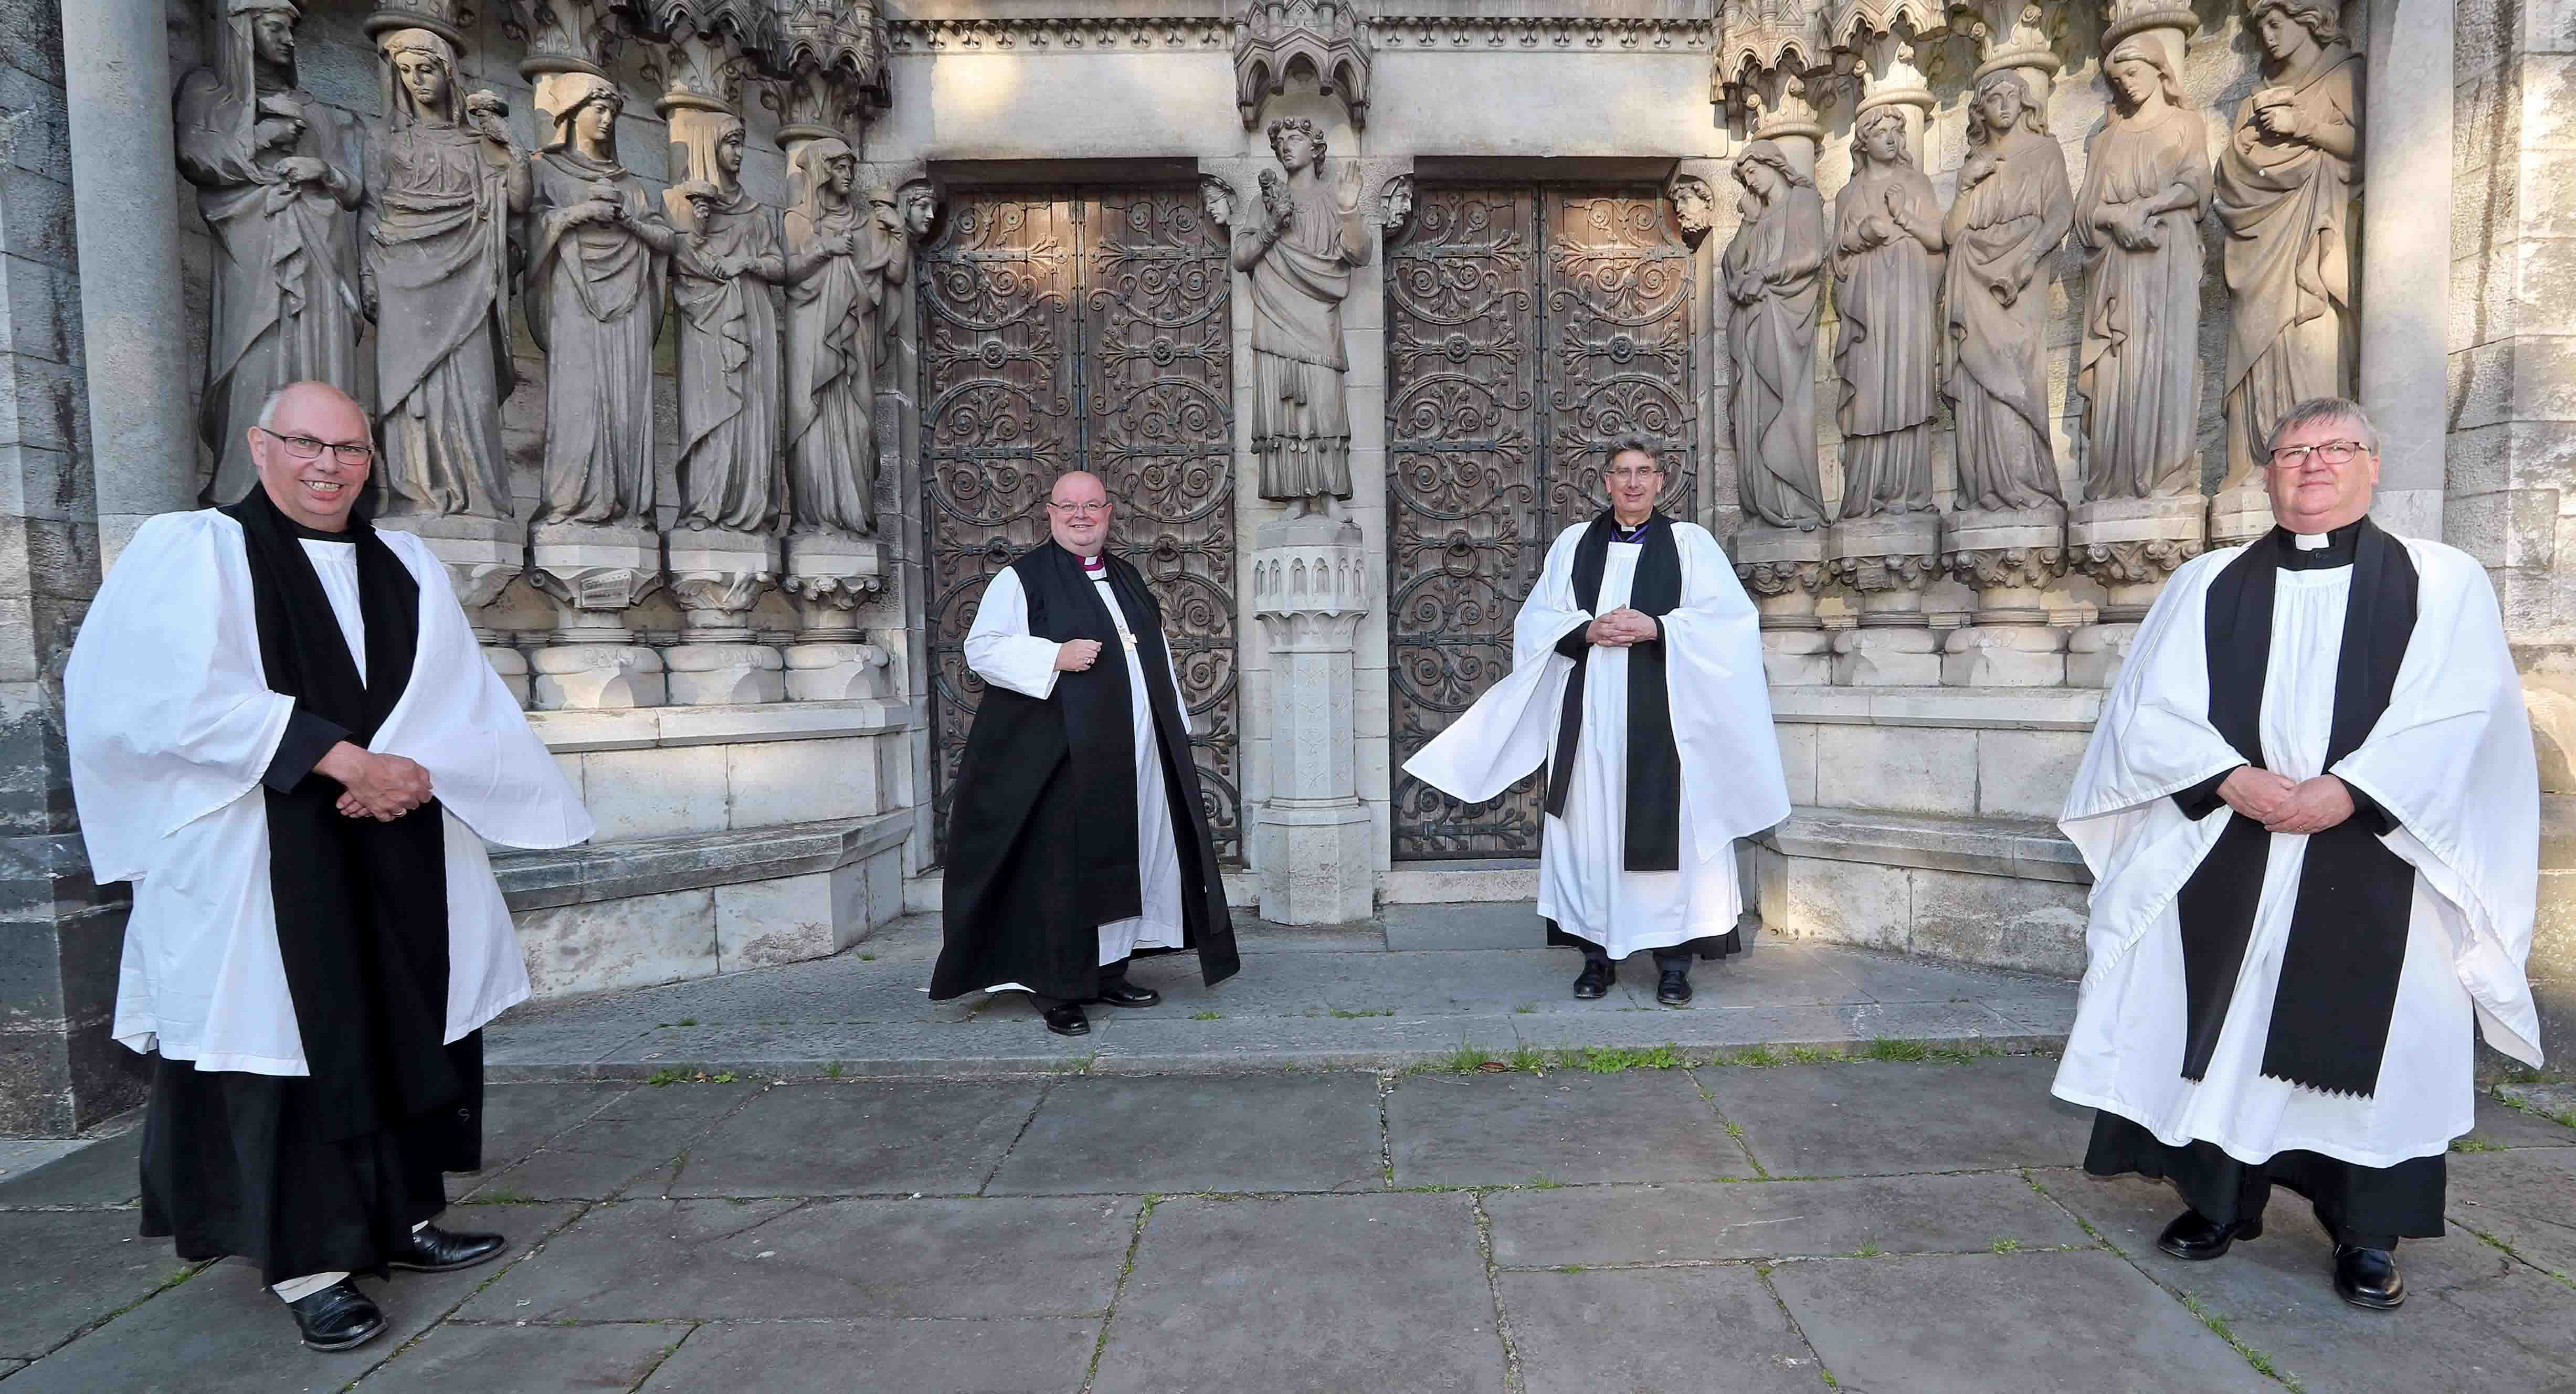 The Bishop of Cork, Cloyne and Ross, the Right Reverend Dr Paul Colton (second from left), and the Very Reverend Nigel Dunne, Dean of Cork (third from left), with the Revd Canon Andrew Orr and the Revd Canon Denis MacCarthy, at the Cathedral Church of Saint Fin Barre, Cork, following Evening Prayer with the Installation of the Revd Canon Denis MacCarthy, as Prebendary of Kilbrittain and Holy Trinity and the Installation of The Revd Canon Andrew Orr, as Honorary Canon with Special Responsibility for the Fifth Mark of Mission. Picture: Jim Coughlan.